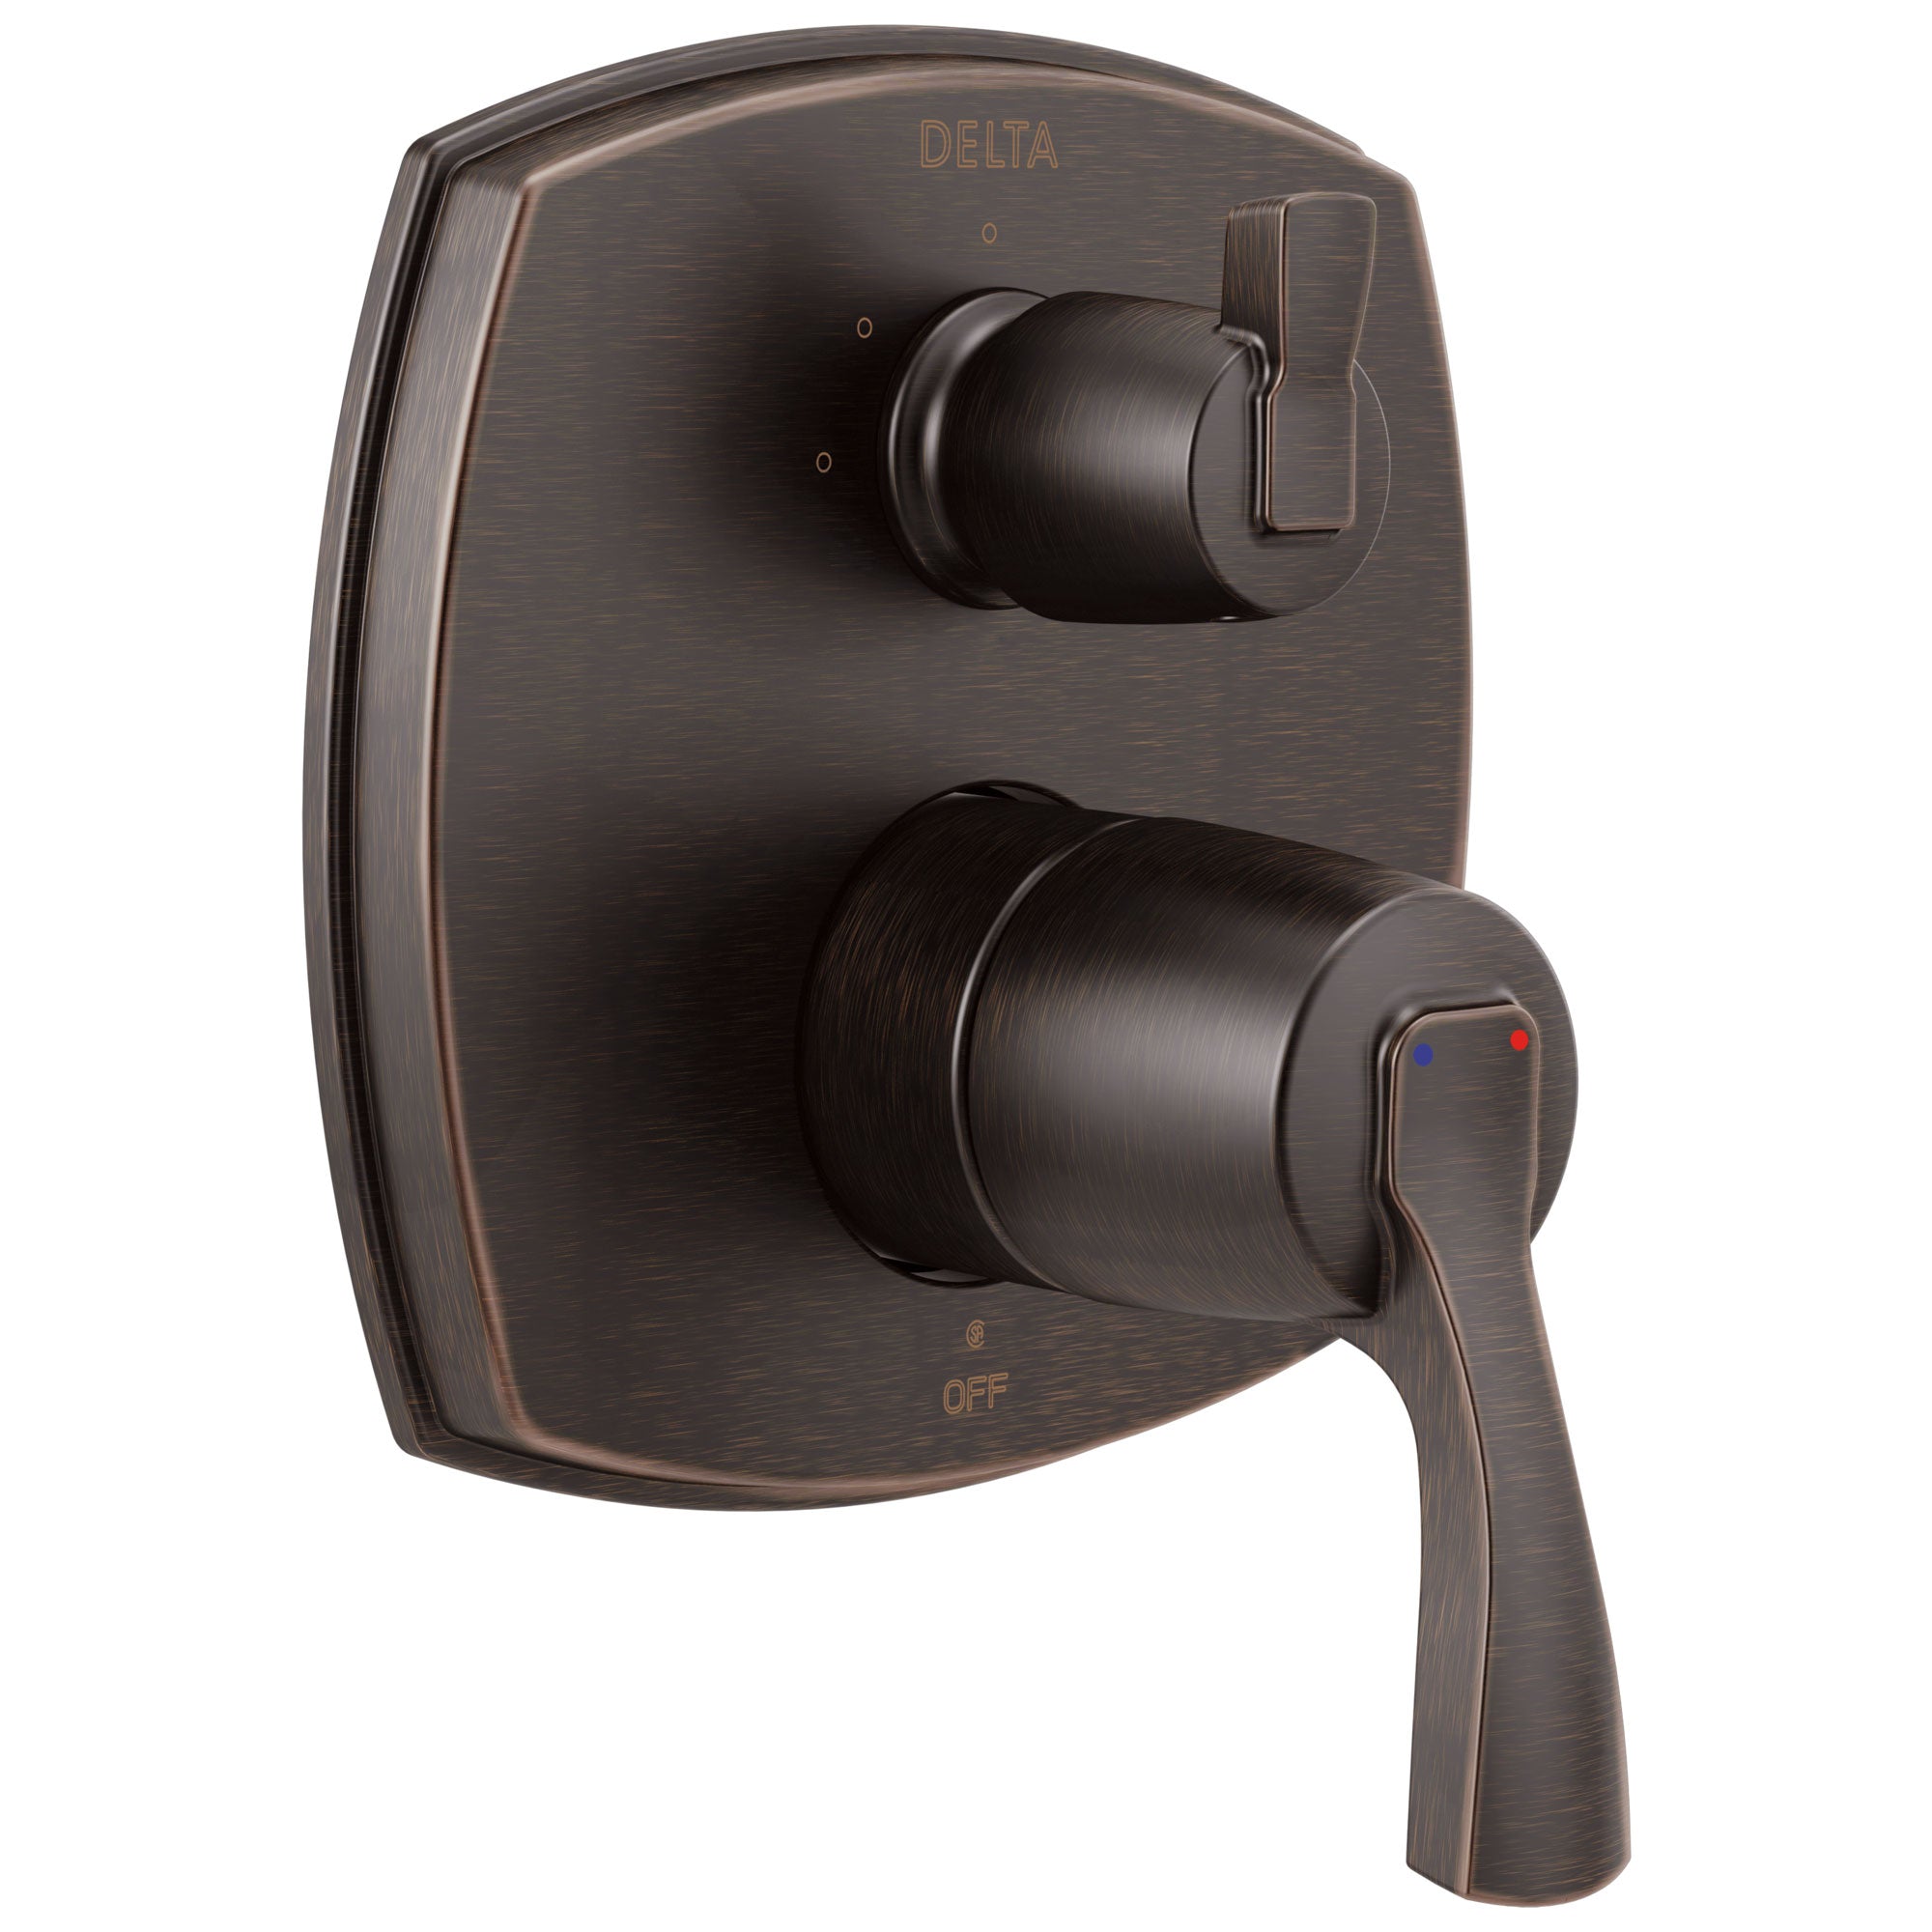 Delta Stryke Venetian Bronze Finish 14 Series Shower System Control with 3 Function Integrated Lever Handle Diverter Includes Valve and Handles D3196V